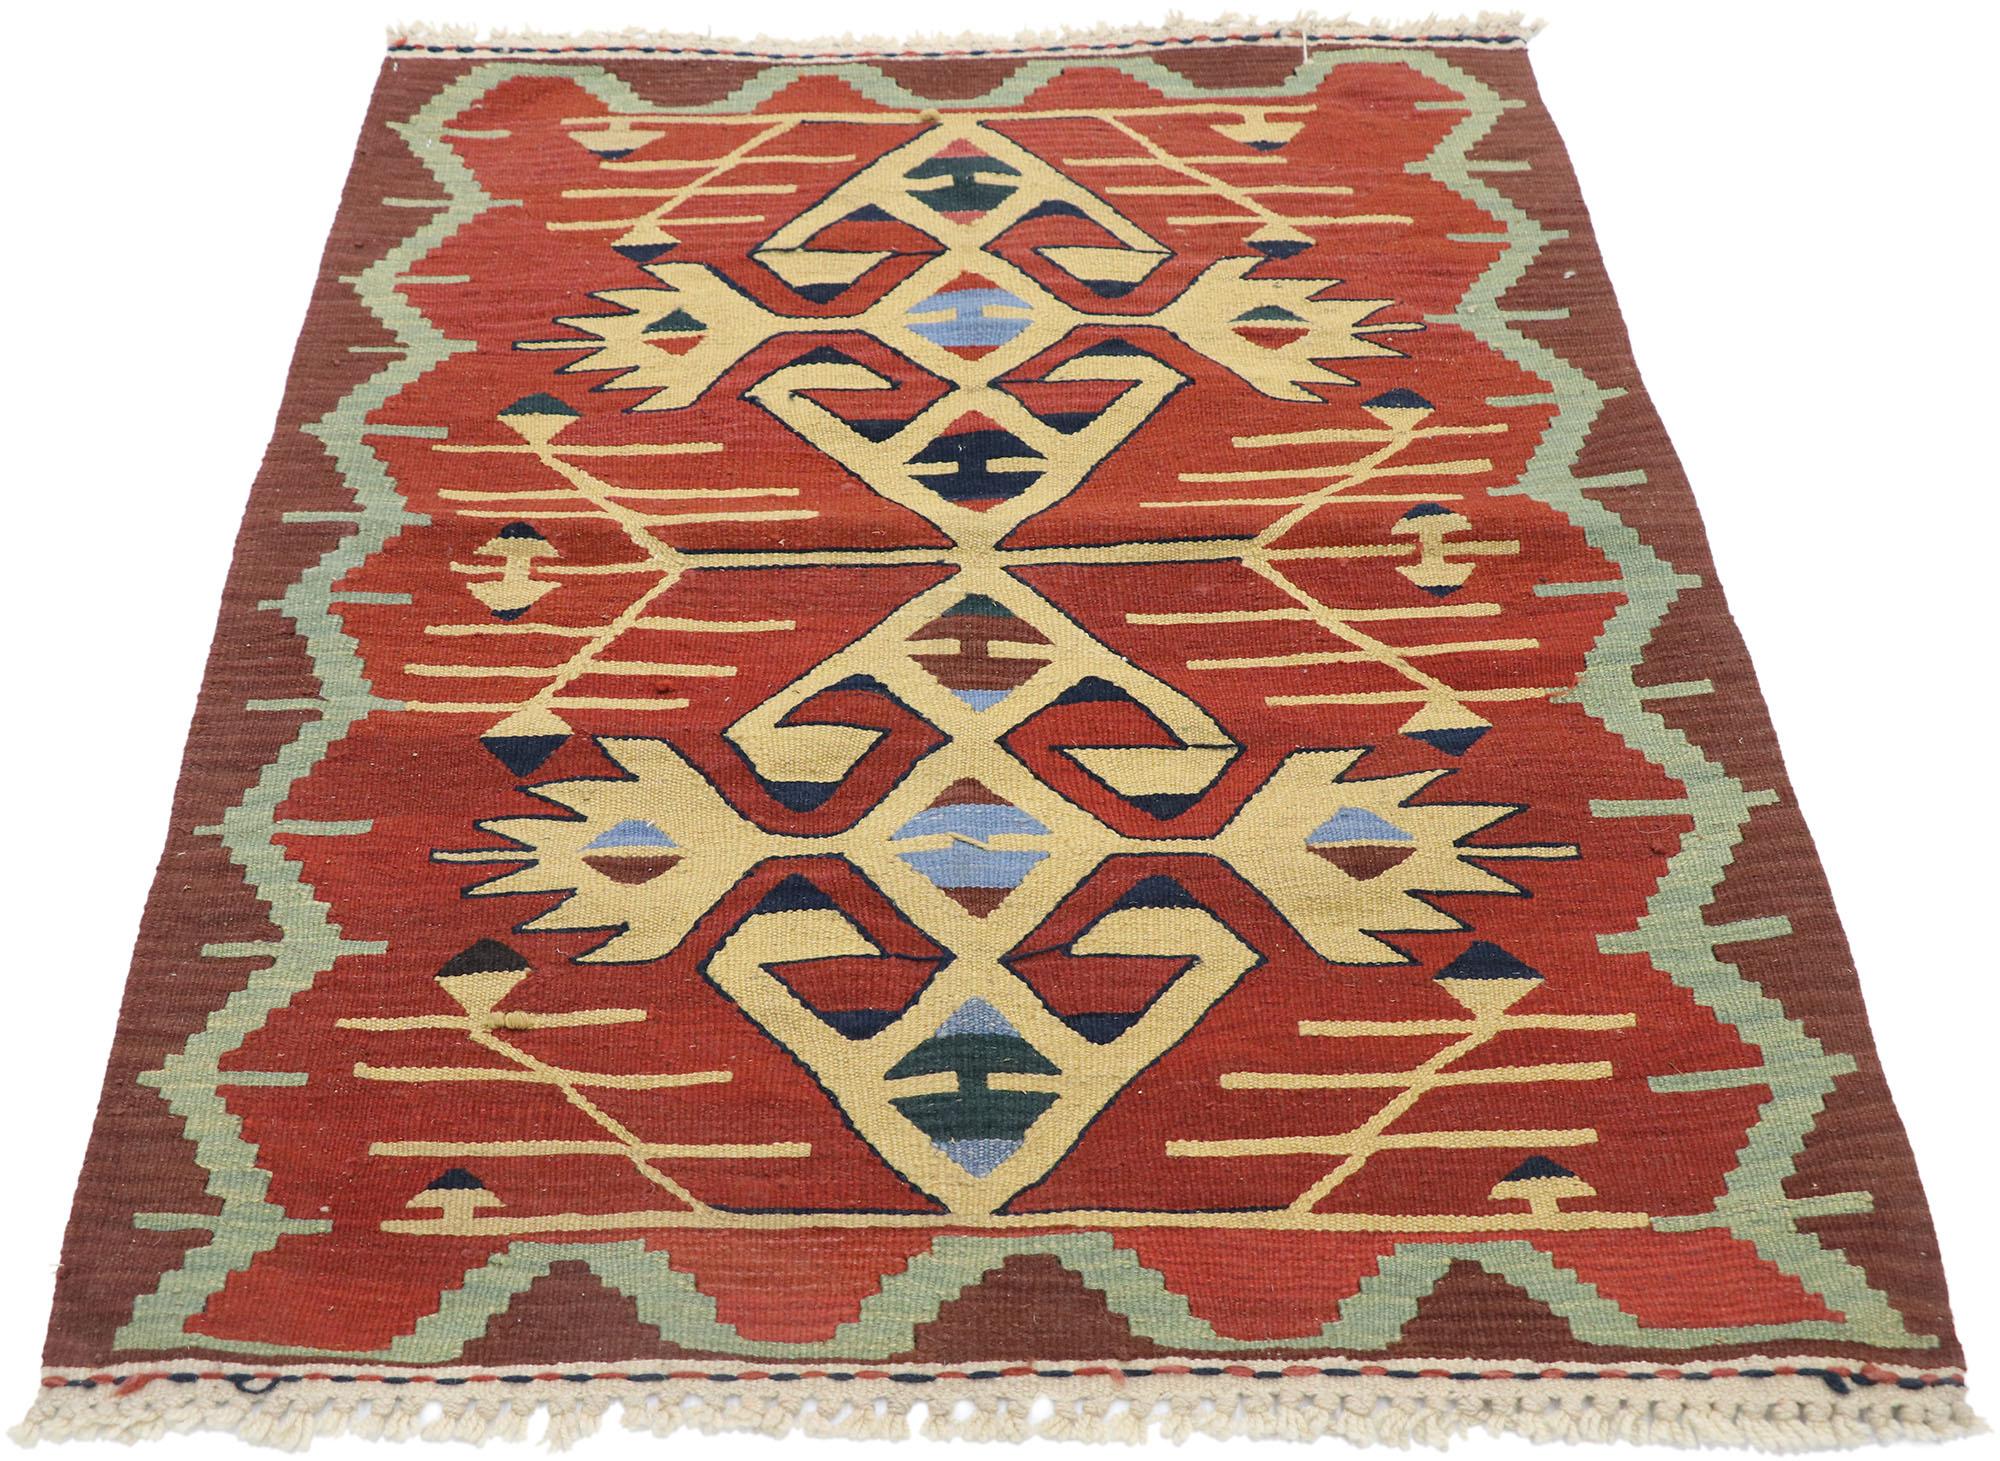 Hand-Woven Vintage Persian Shiraz Kilim Rug, Modern Southwest Style Meets Luxury Lodge For Sale